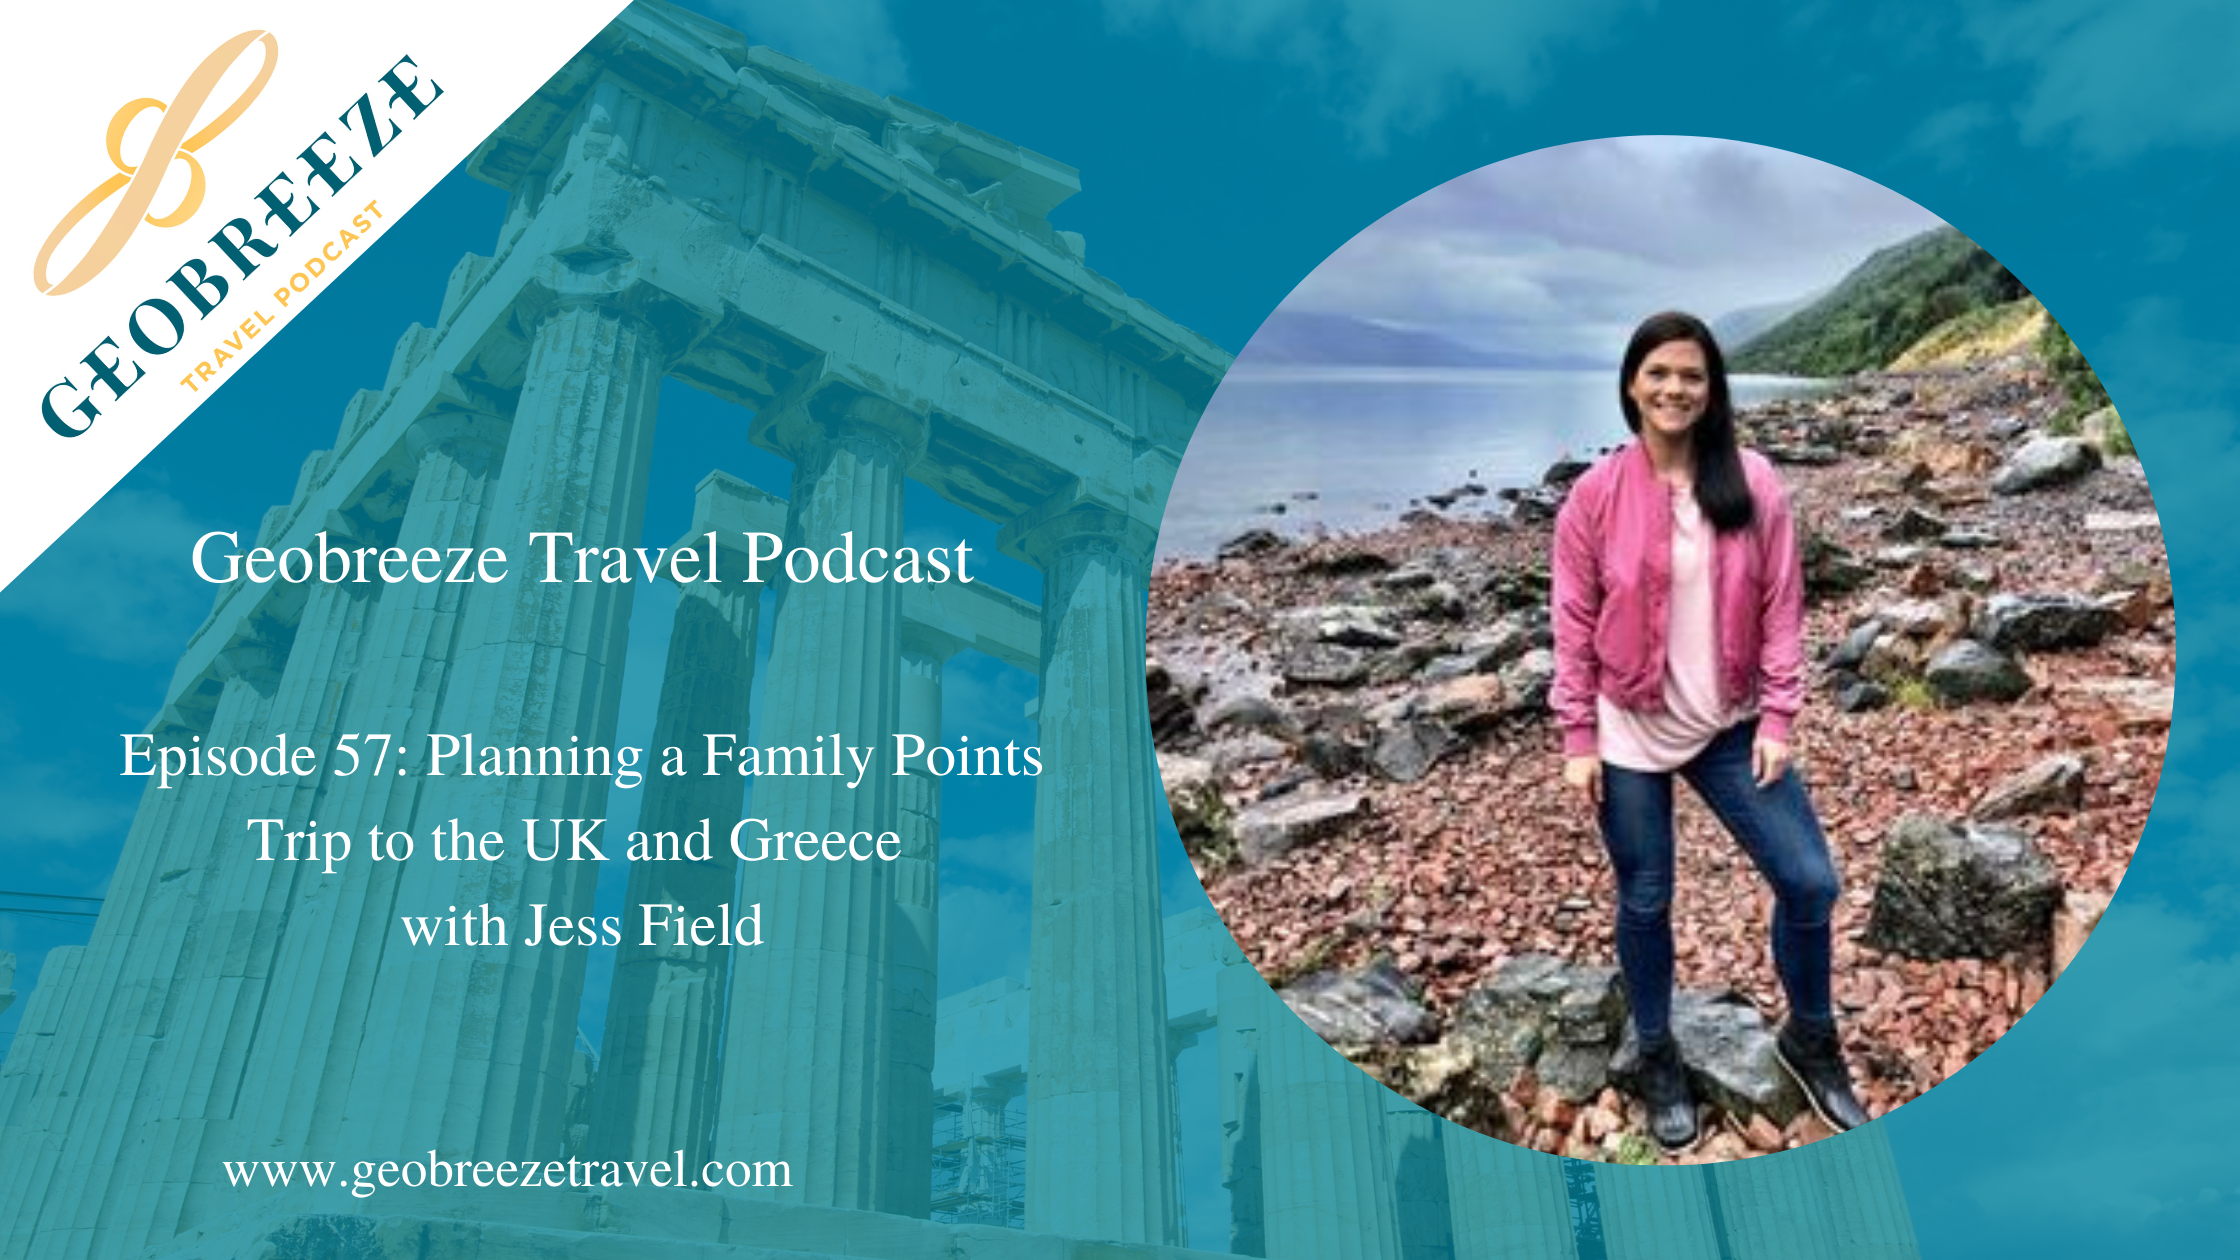 Episode 57: Planning a Family Points Trip to the UK and Greece on Points with Jess Field